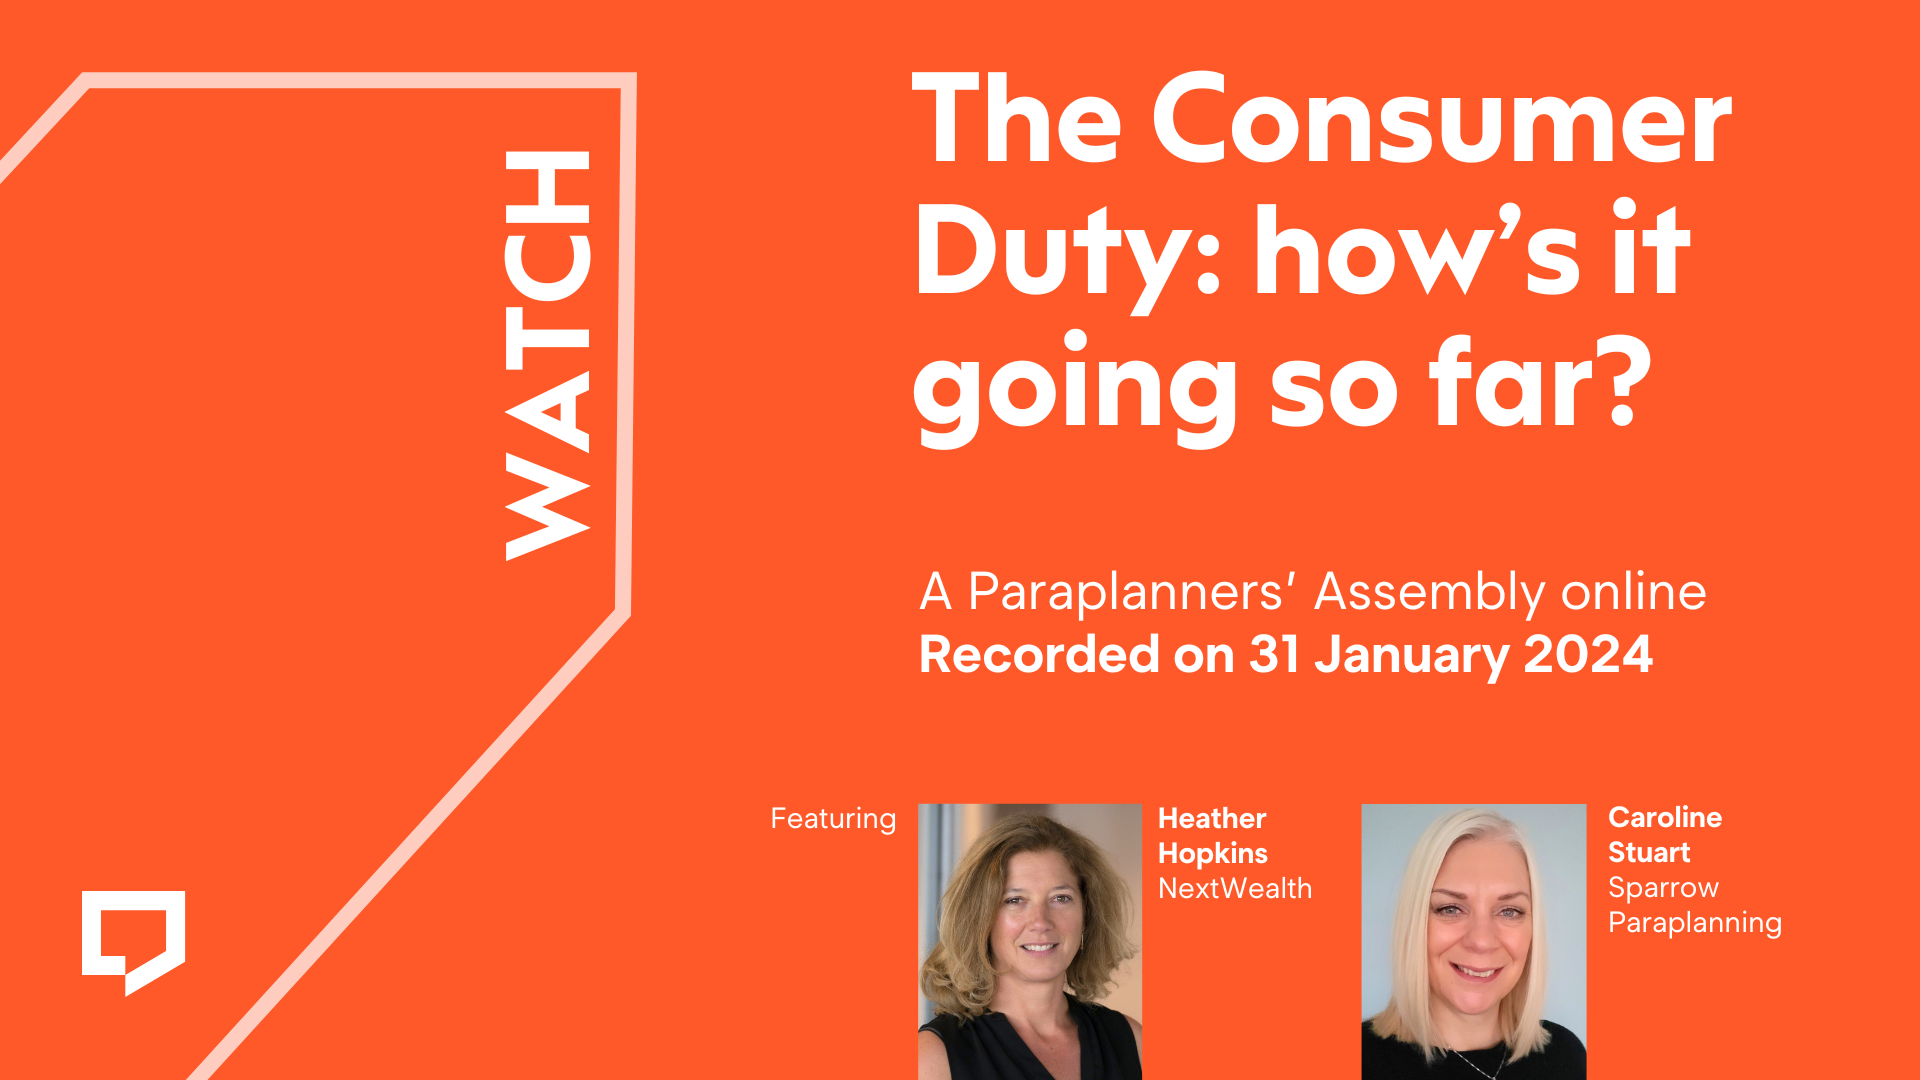 Watch 'The Consumer Duty: how's it going so far?' A Paraplanners' Assembly online on 31 January 2024 featuring Heather Hopkins and Caroline Stuart